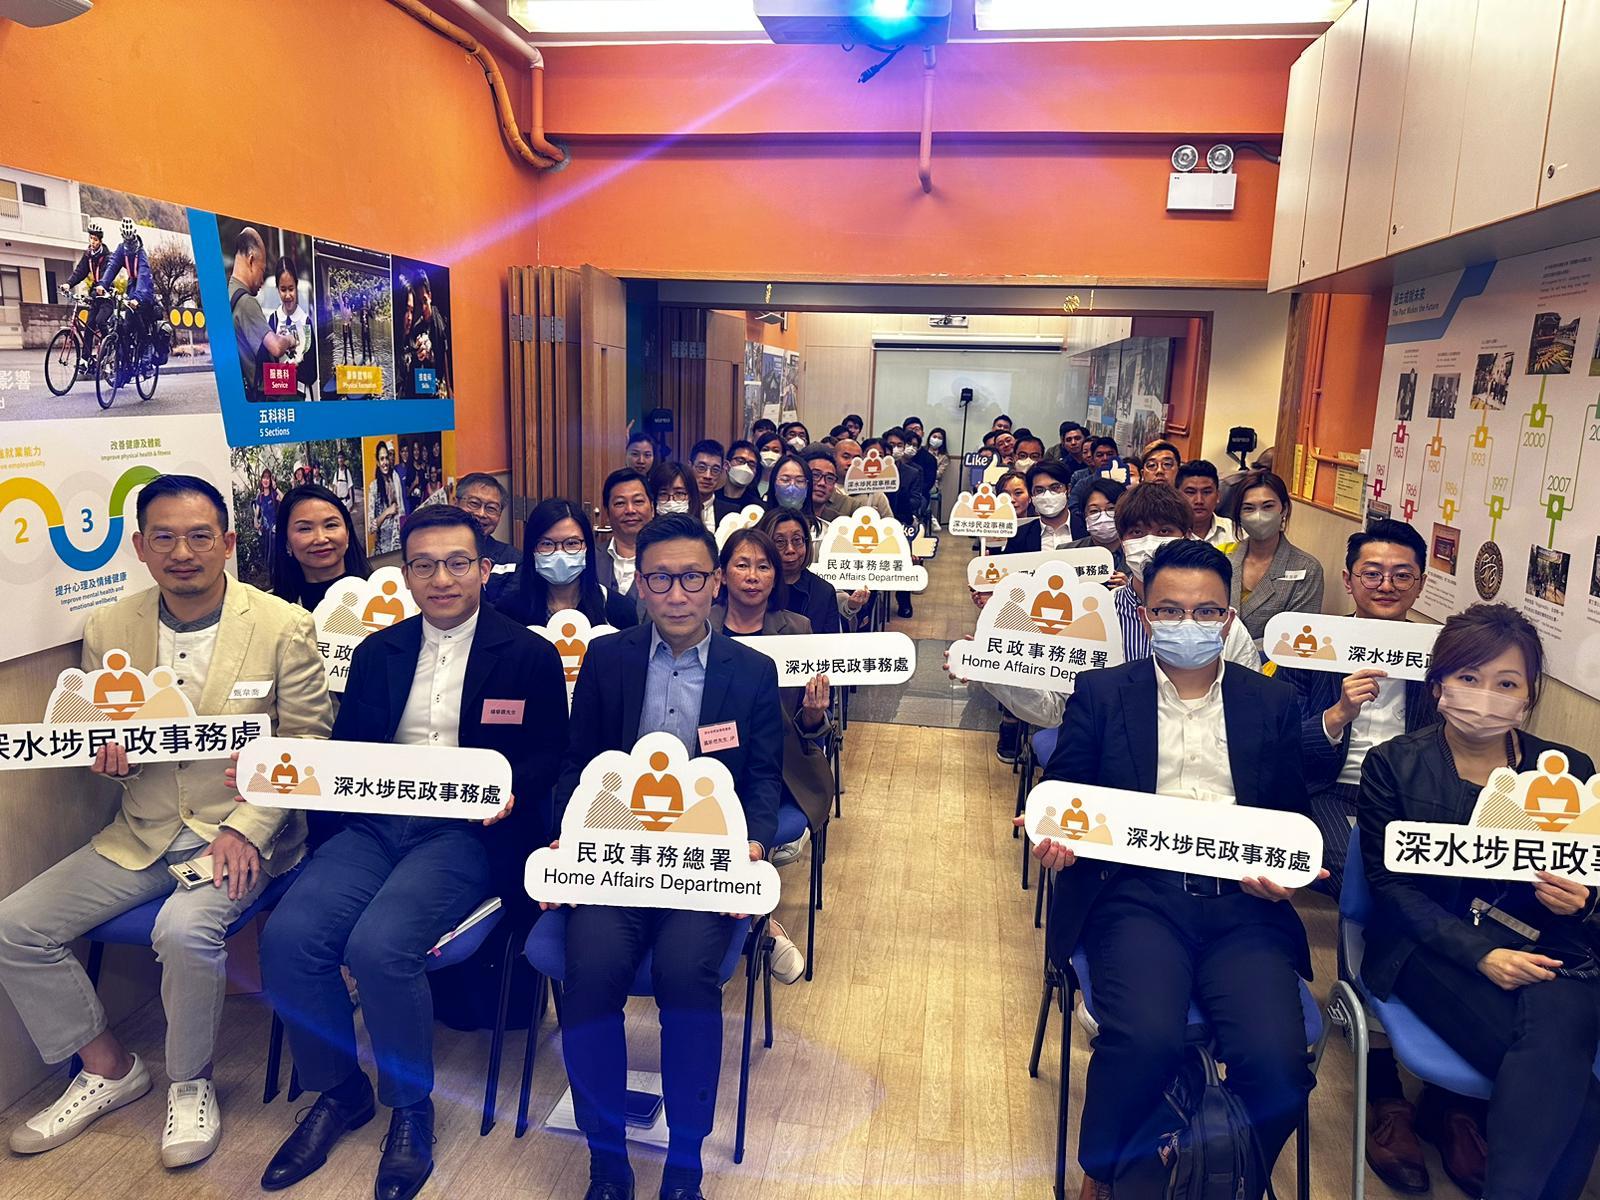 District Offices have held seminars on "Spirit of the 'two sessions'" to study the essentials of the "two sessions" this year and its important instructions to Hong Kong's future development. The Sham Shui Po District Office held the "Youth forum - Vision of Sham Shui Po" on March 14 in Cheung Sha Wan. Photo shows the guests and participants at the forum.